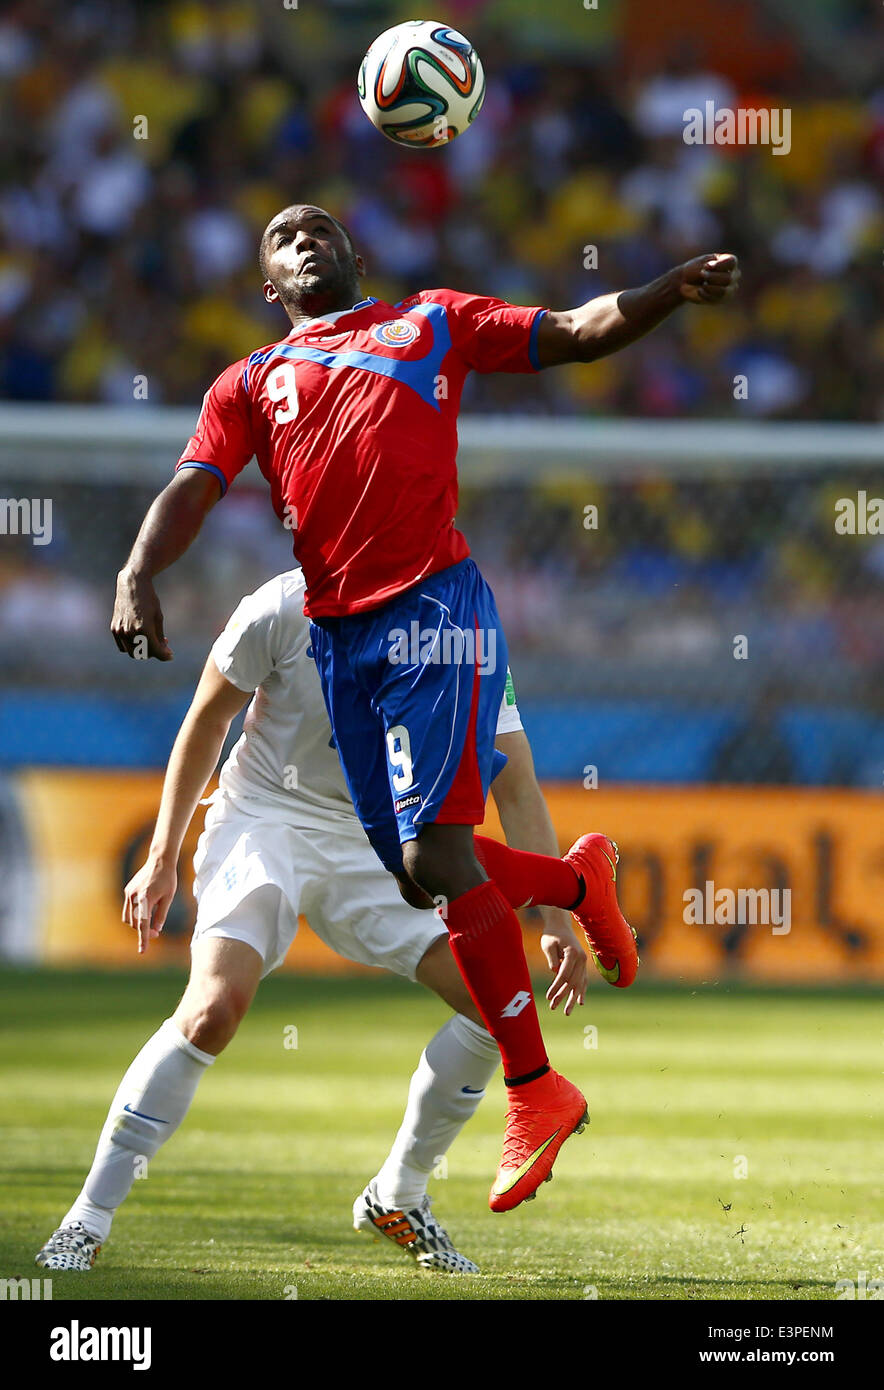 Belo Horizonte, Brazil. 24th June, 2014. Costa Rica's Joel Campbell (front) competes for a header during a Group D match between Costa Rica and England of 2014 FIFA World Cup at the Estadio Mineirao Stadium in Belo Horizonte, Brazil, on June 24, 2014. © Liu Bin/Xinhua/Alamy Live News Stock Photo